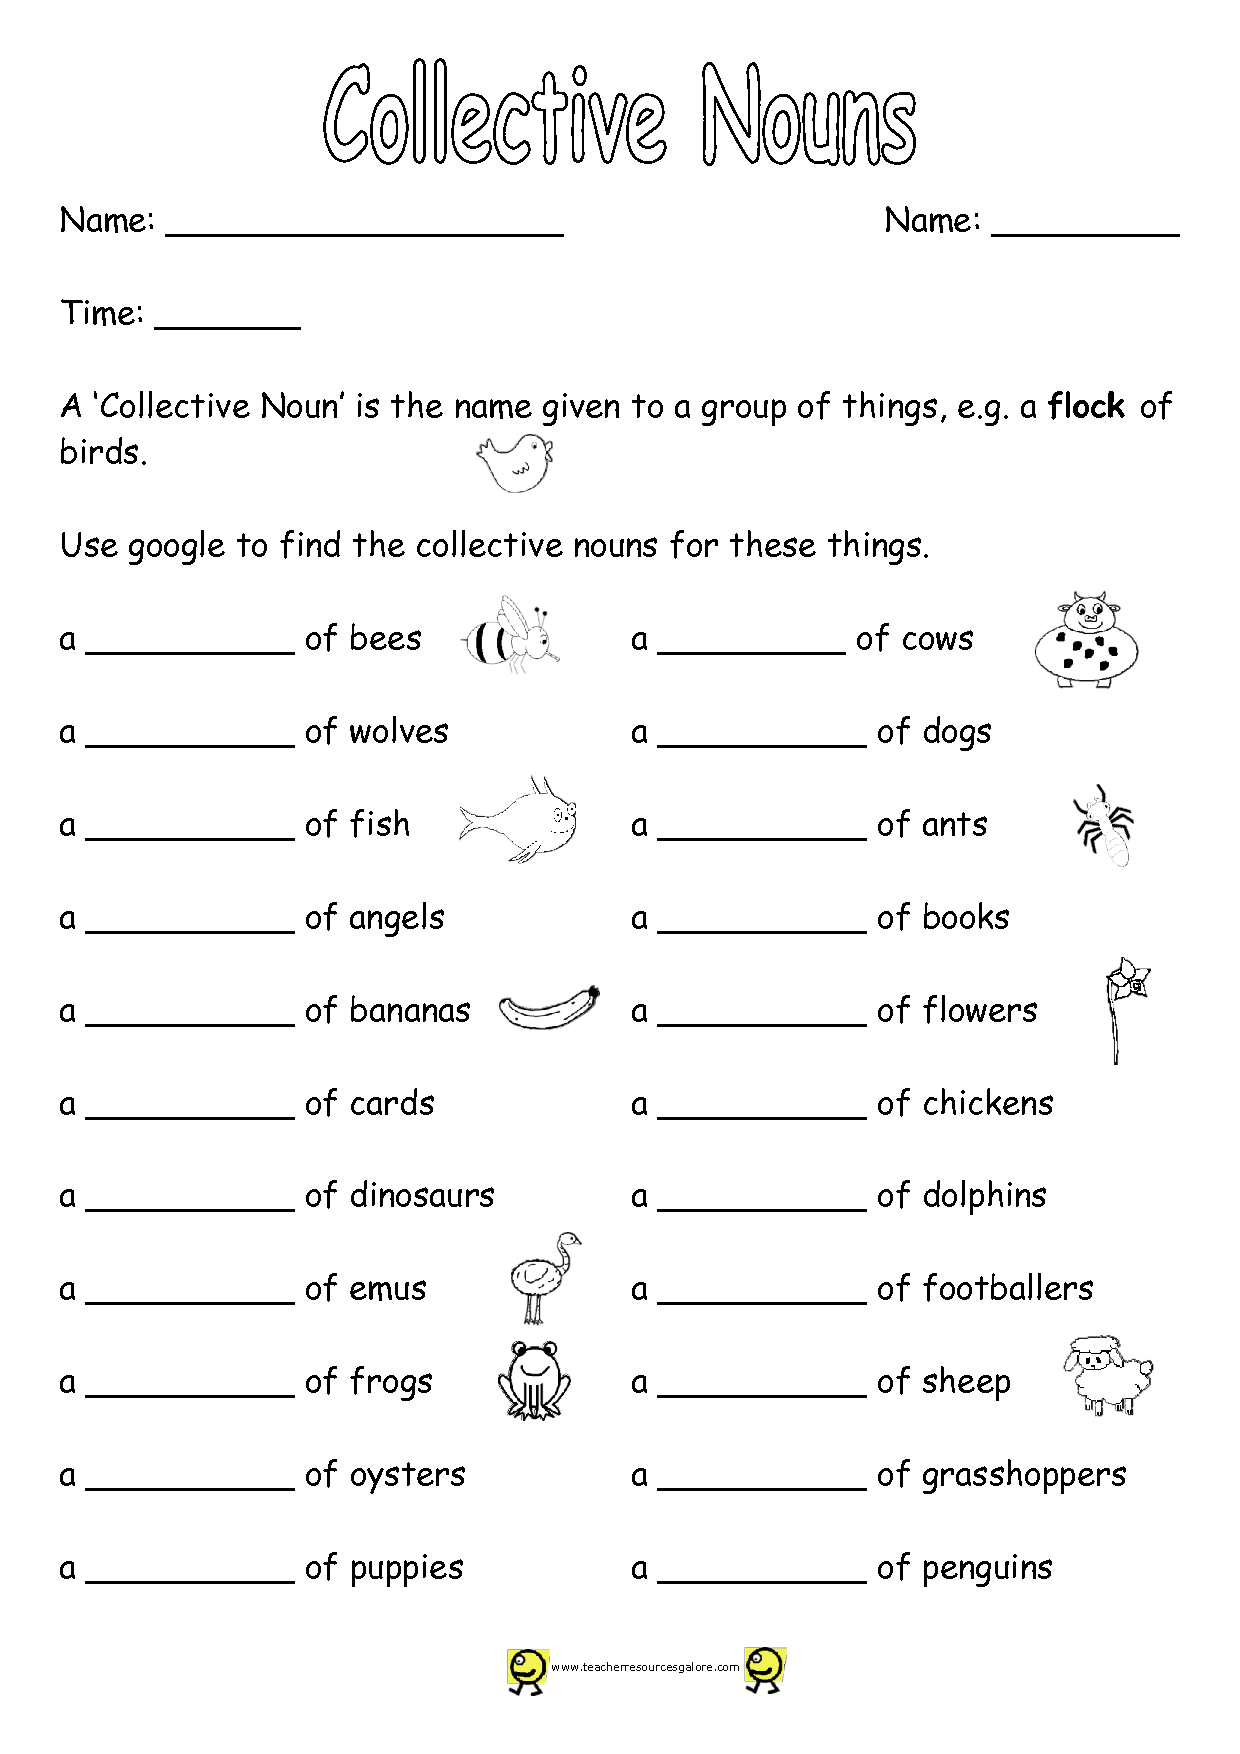 Collective Nouns Worksheet For Class 2